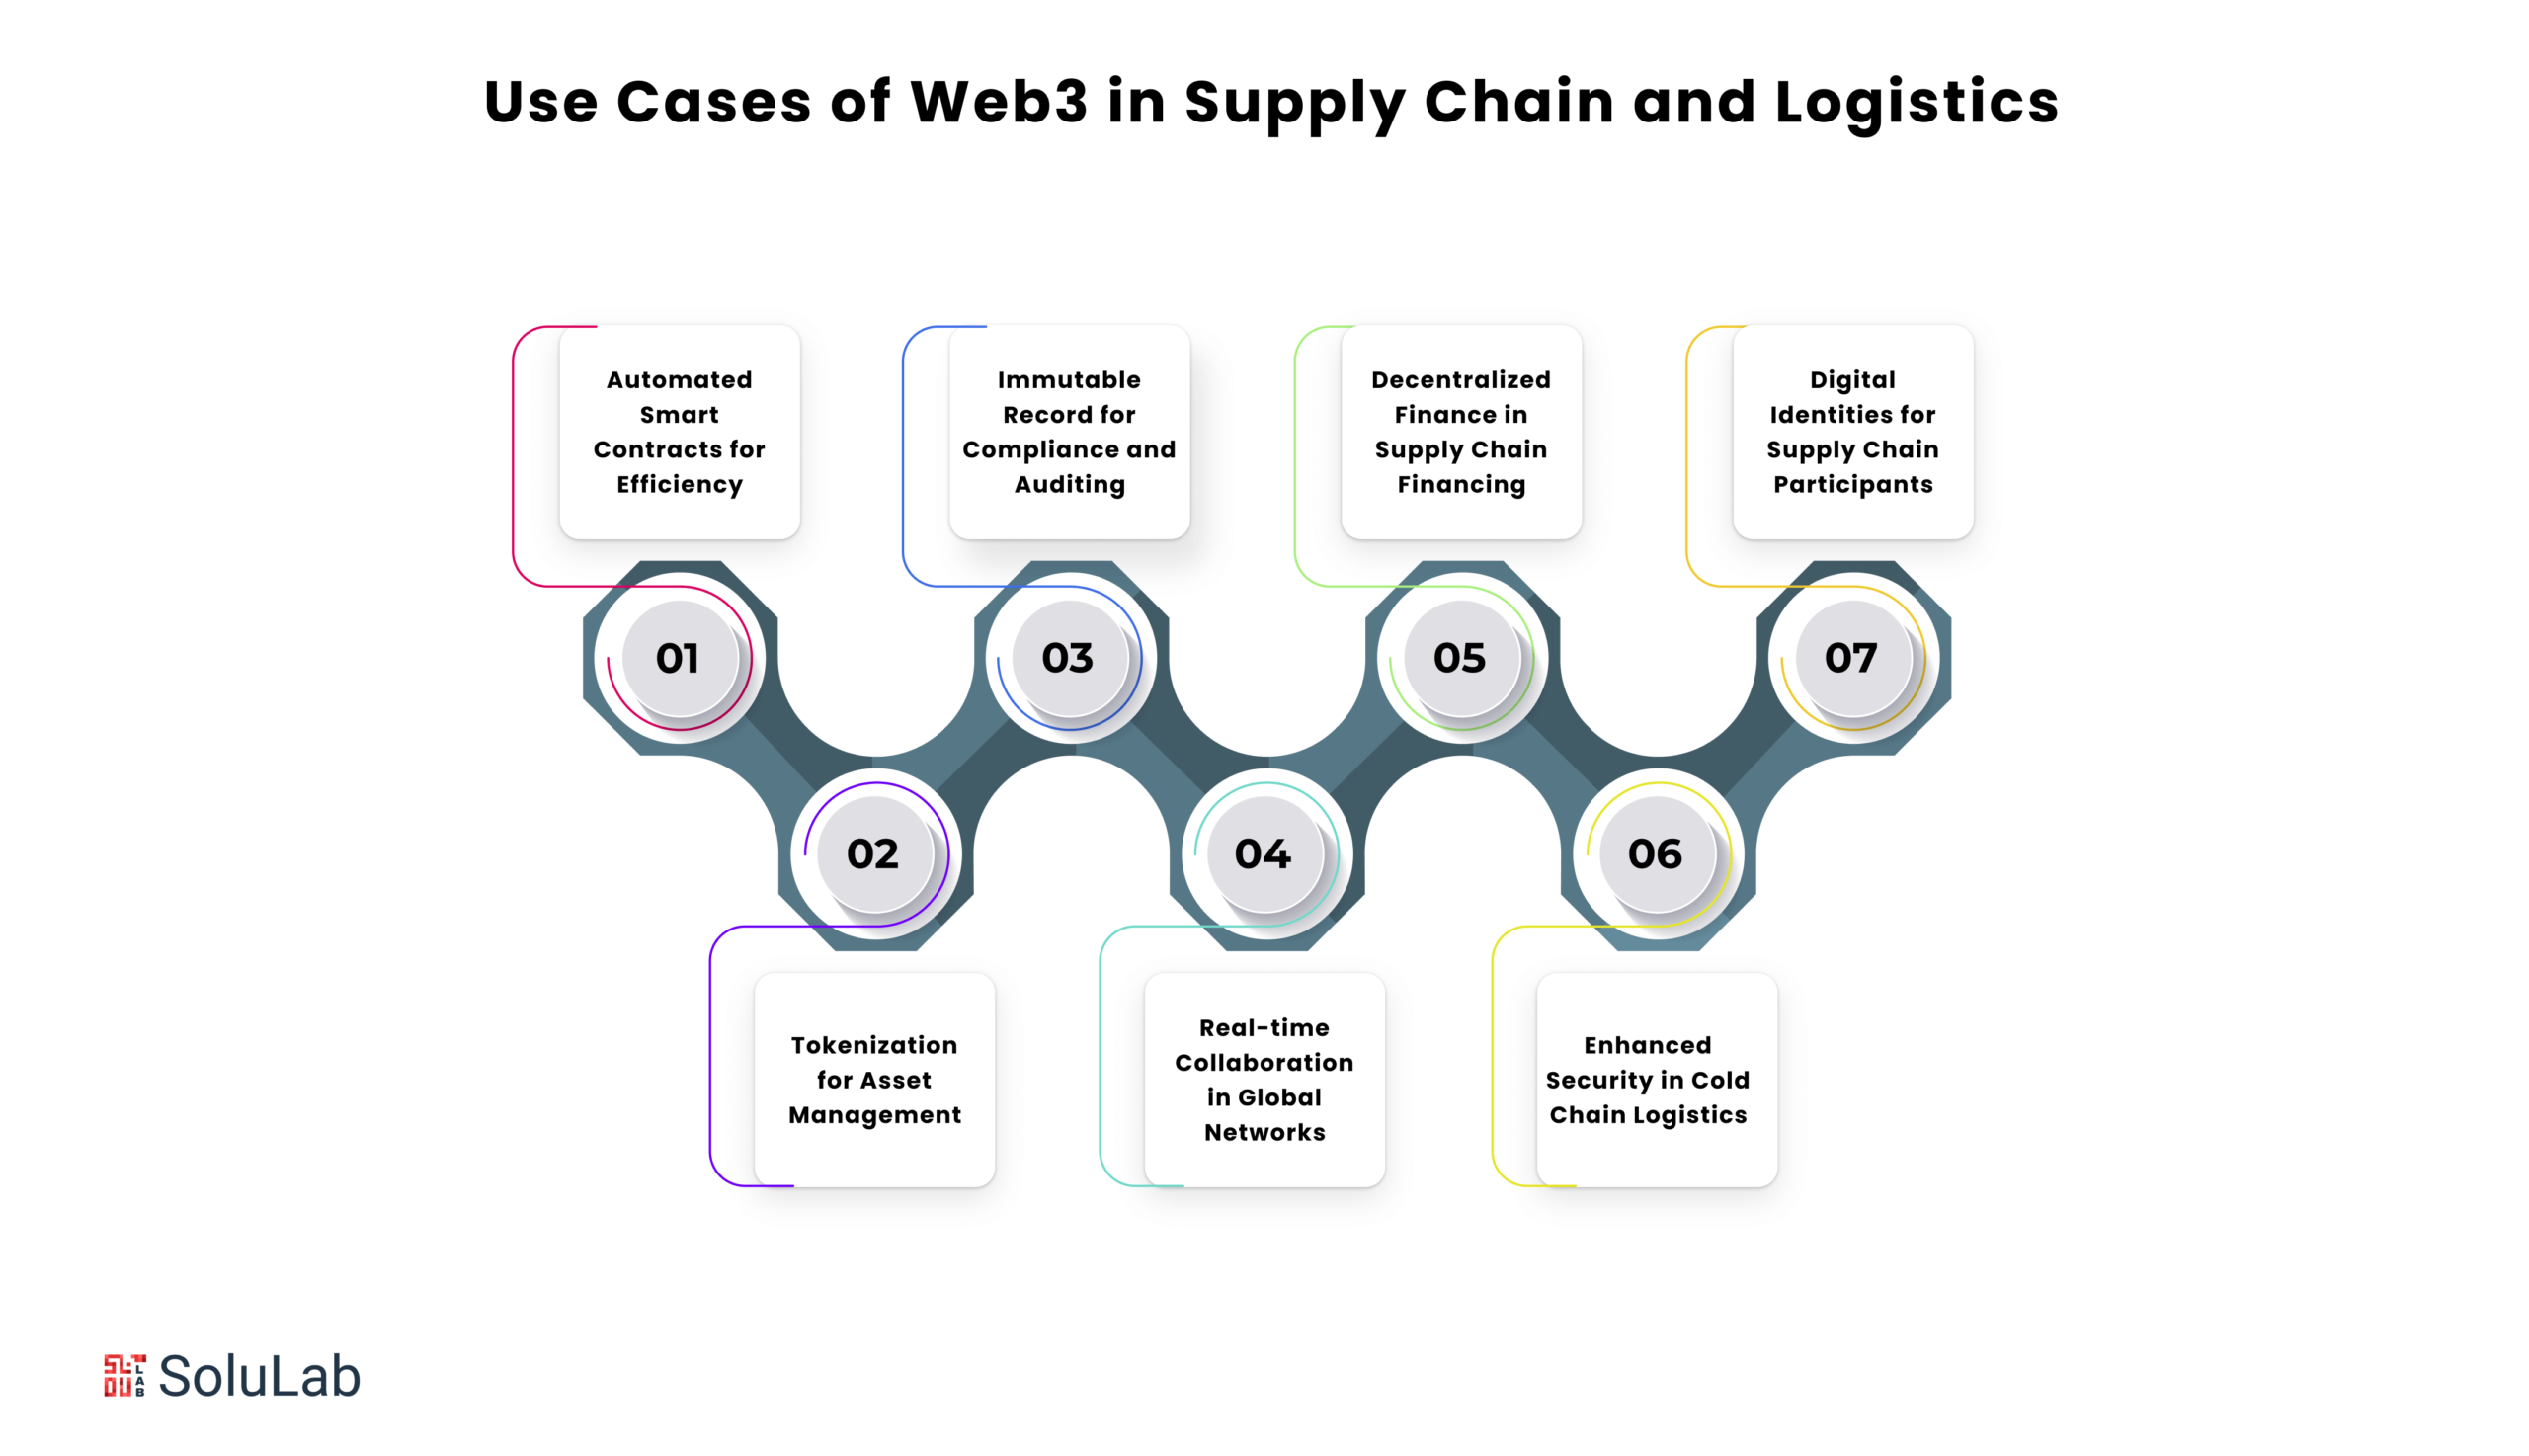 Use Cases of Web3 in Supply Chain and Logistics